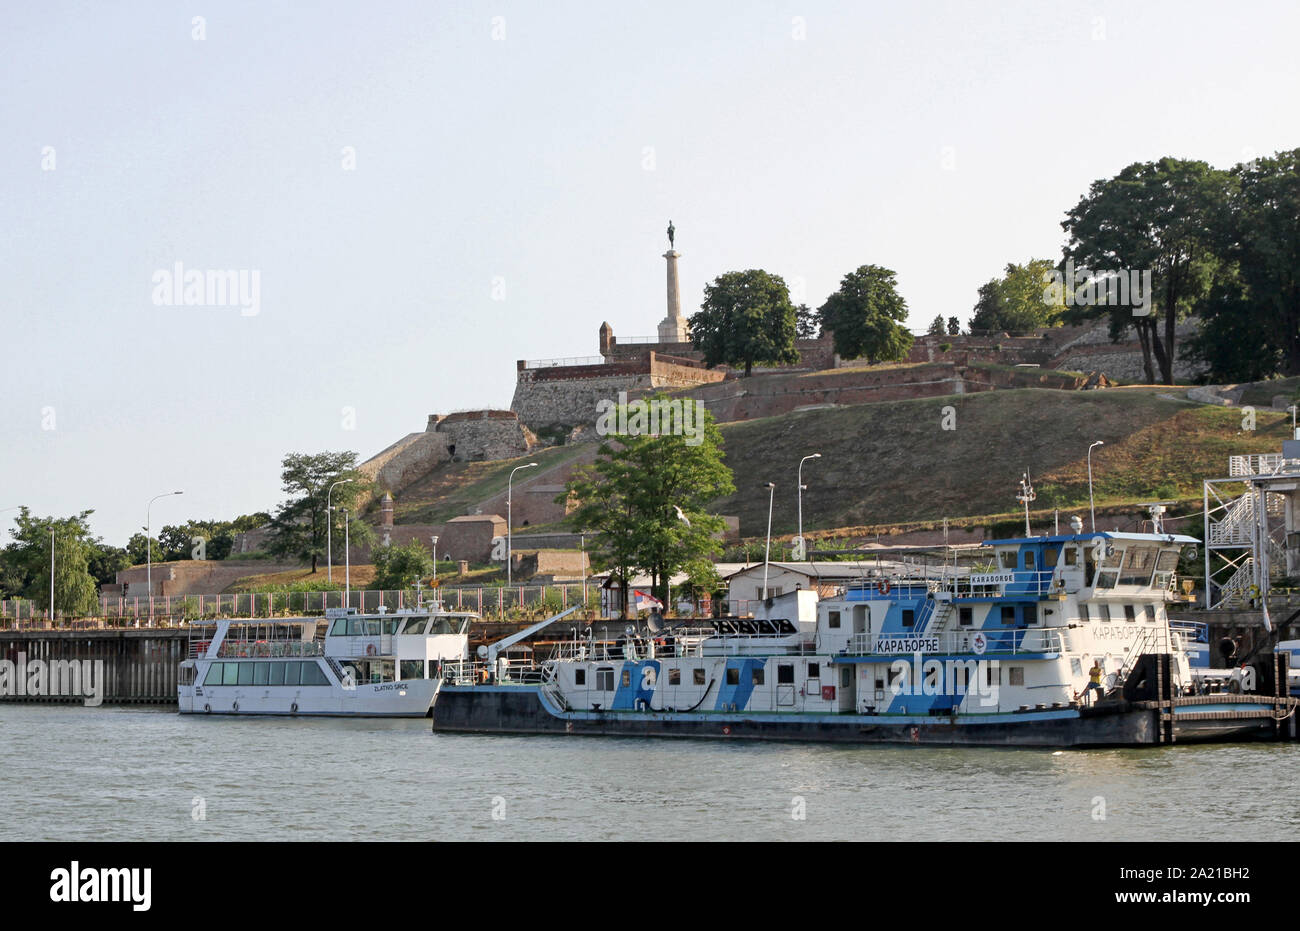 Floating restaurant and bar boat as seen on the confluence of the Sava and Danube Rivers with The Pobednik (Victor) statue monument in the Kalamegdan Park in the background, Belgrade, Serbia. Stock Photo